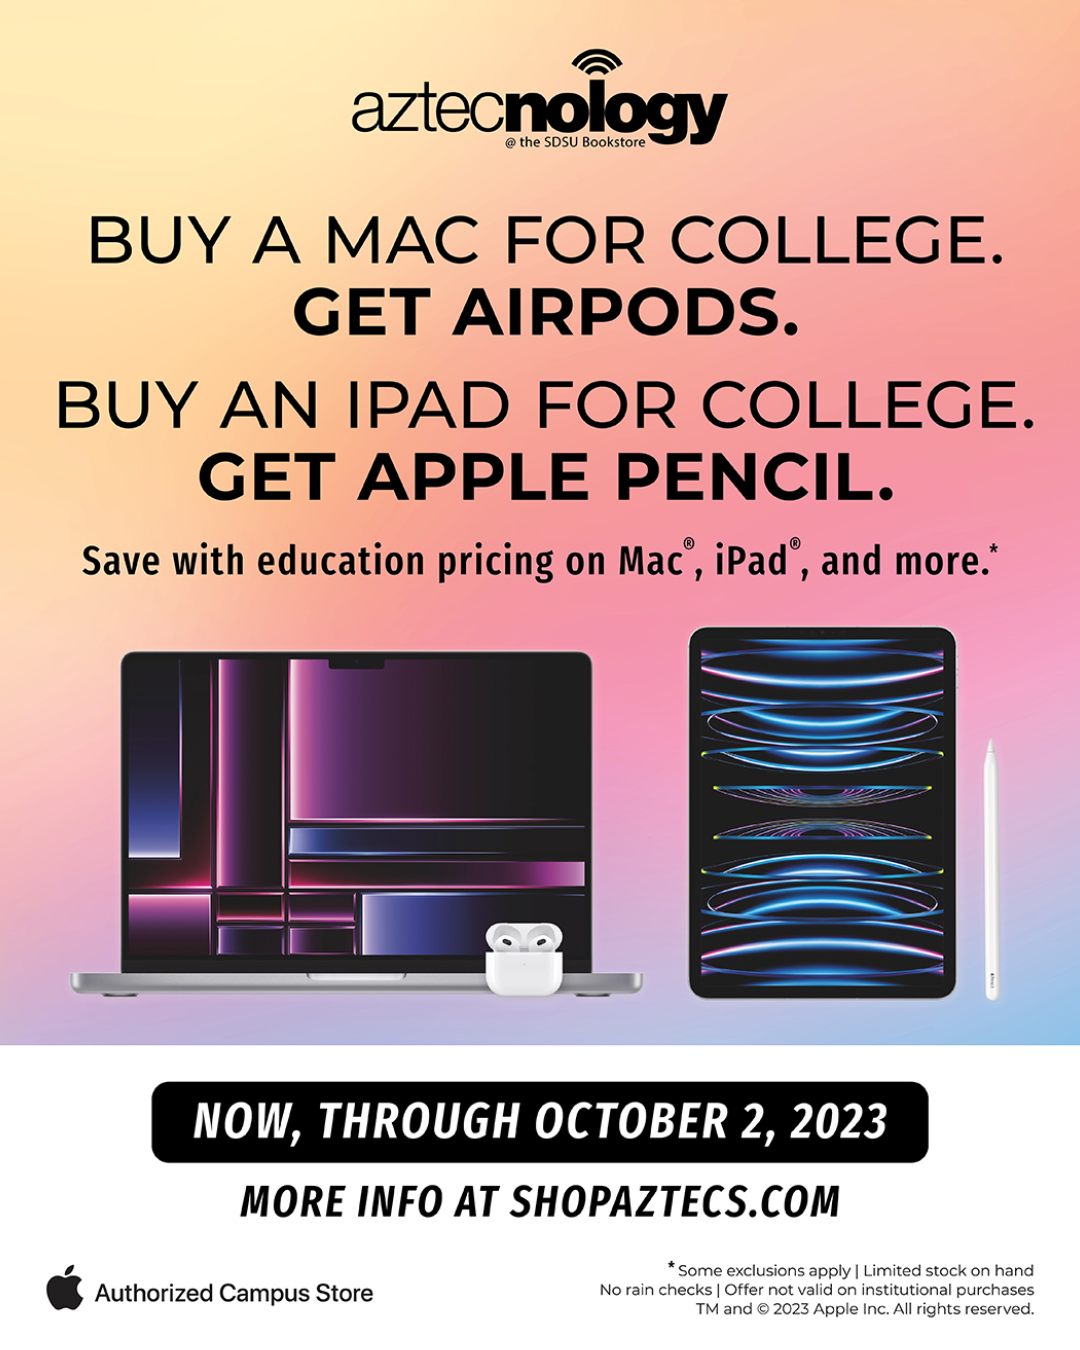 Buy a mac for college. Get airpods. Buy an iPad for college. Get apple pencil. Save with education pricing on Mac, iPad, and more.